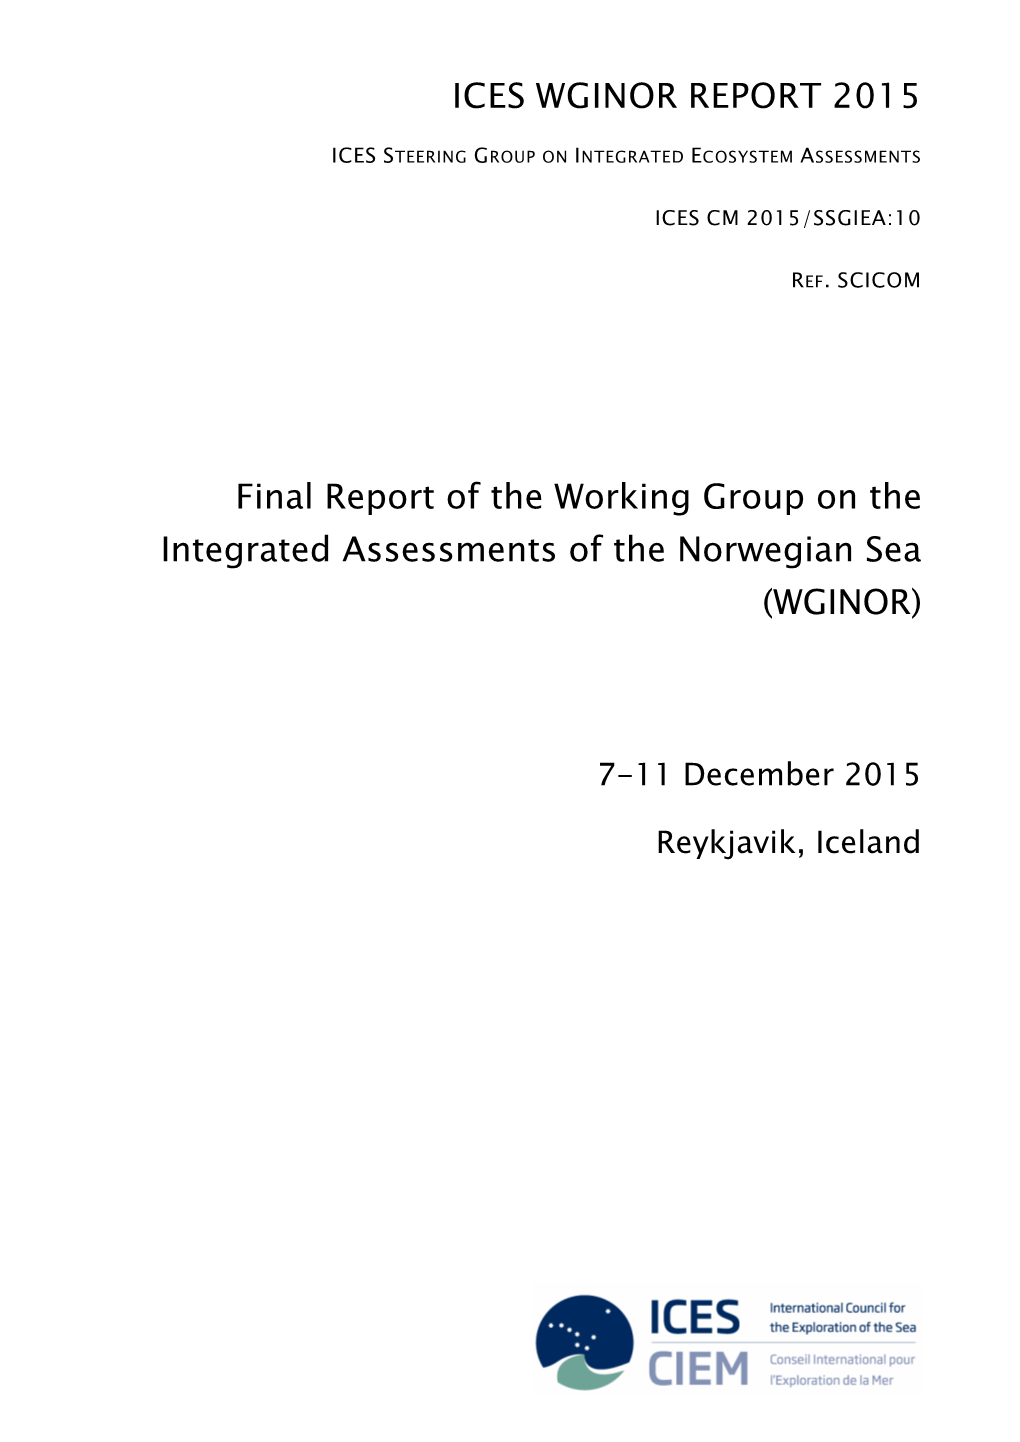 Final Report of the Working Group on the Integrated Assessments of the Norwegian Sea (WGINOR)